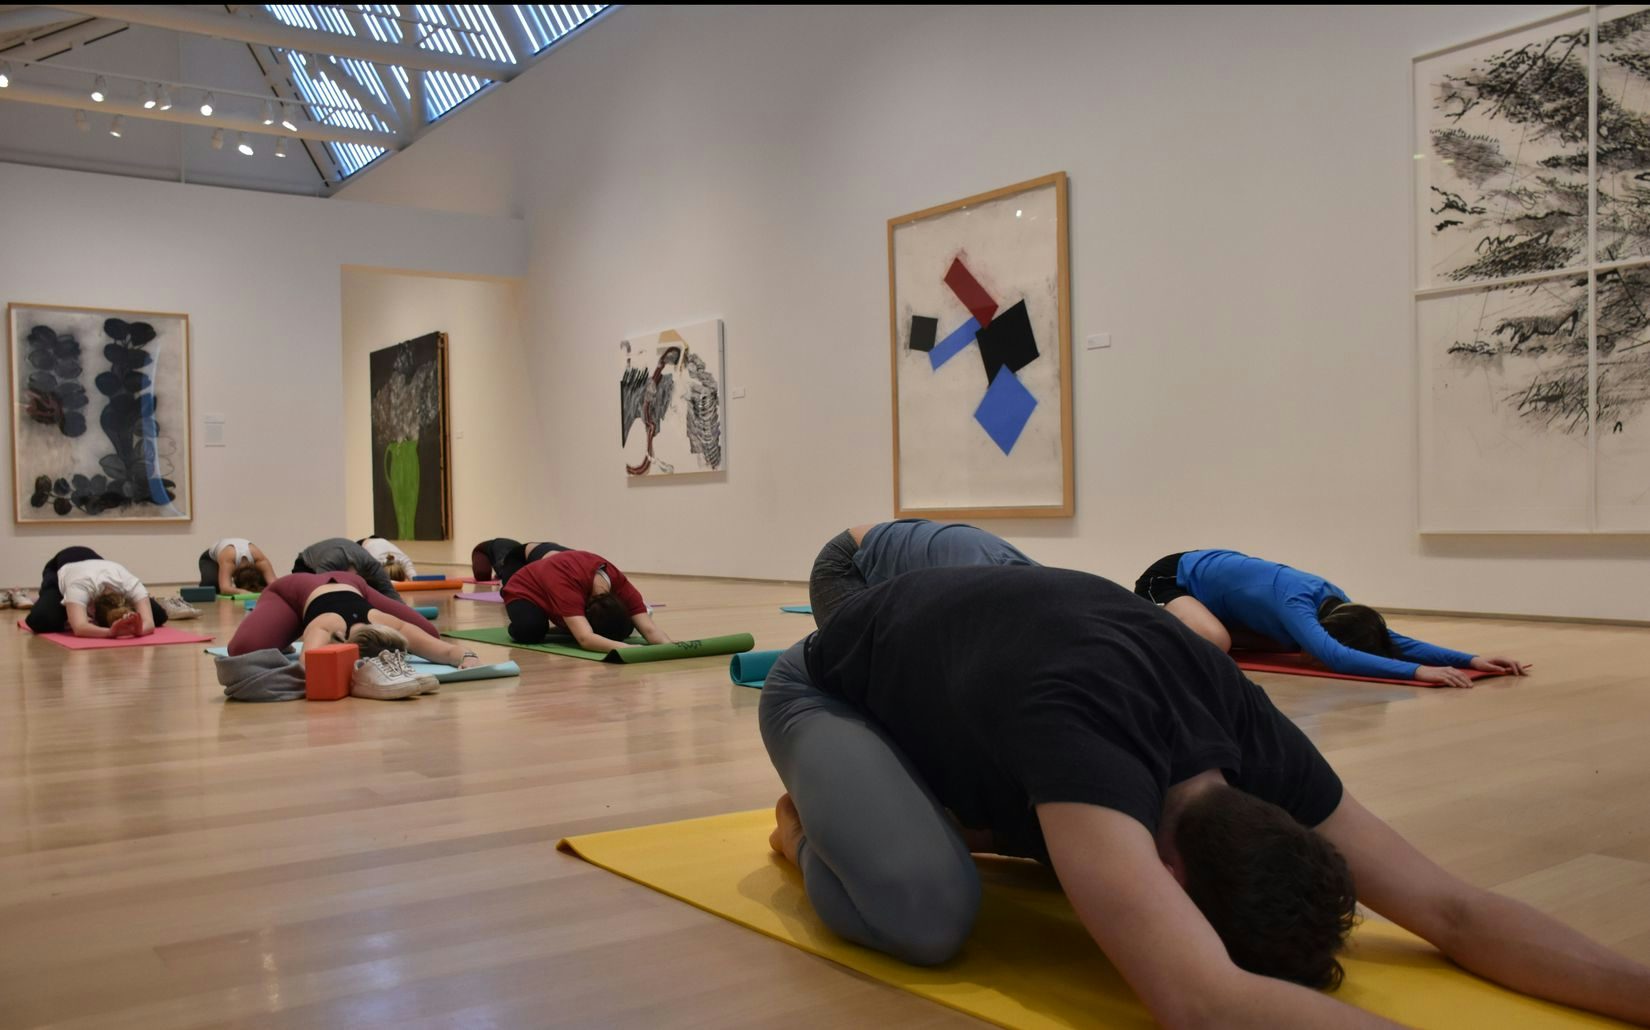 Several people are in Child's Pose during Yoga in the Gallery.